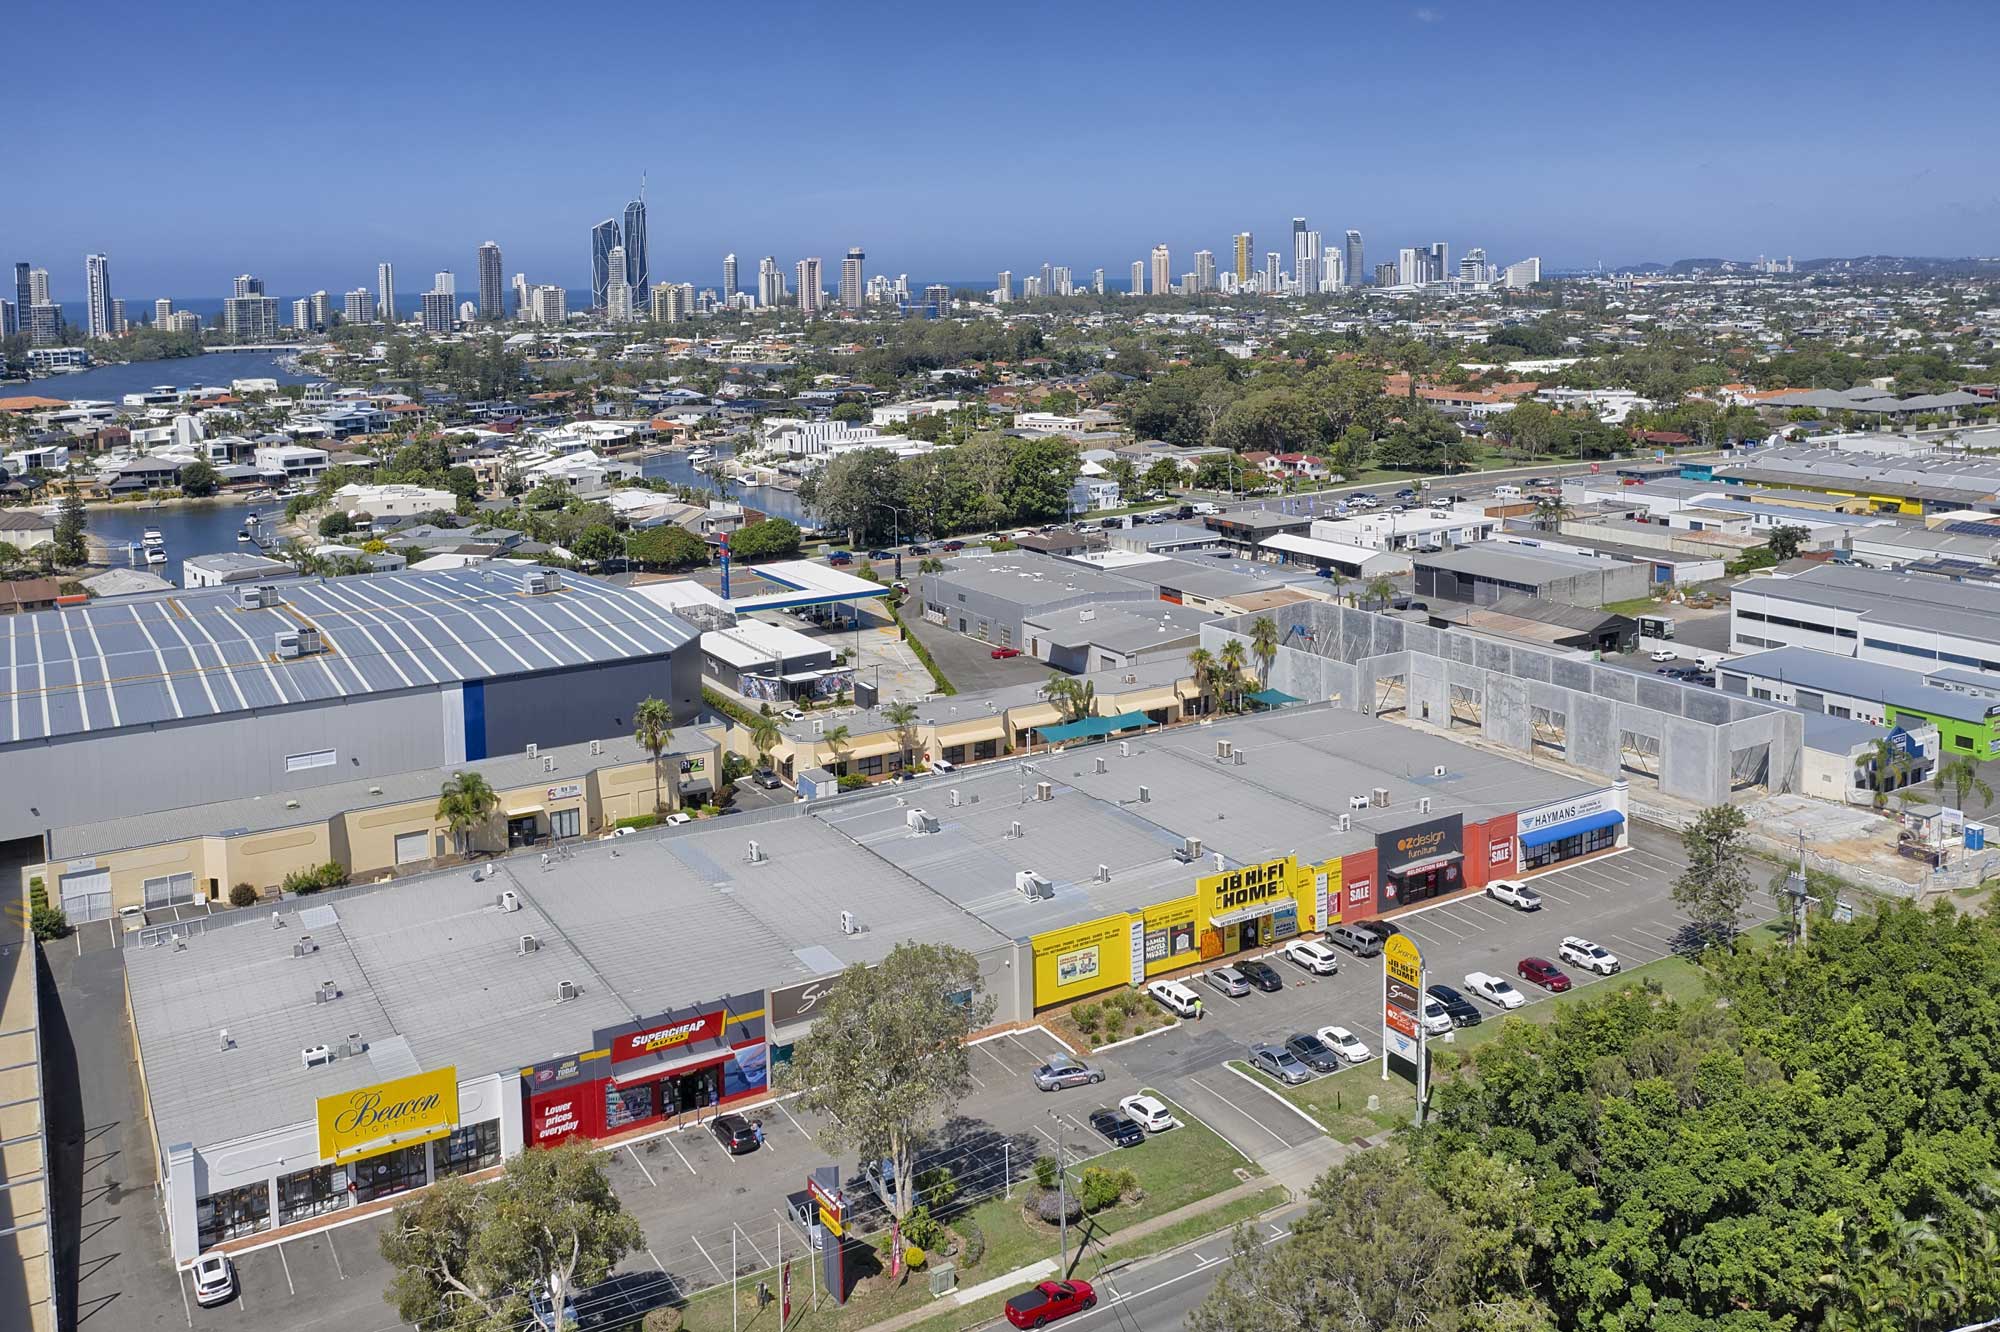 40 metres above the ground - drone photography of large format commercial building at Upton St, Bundall